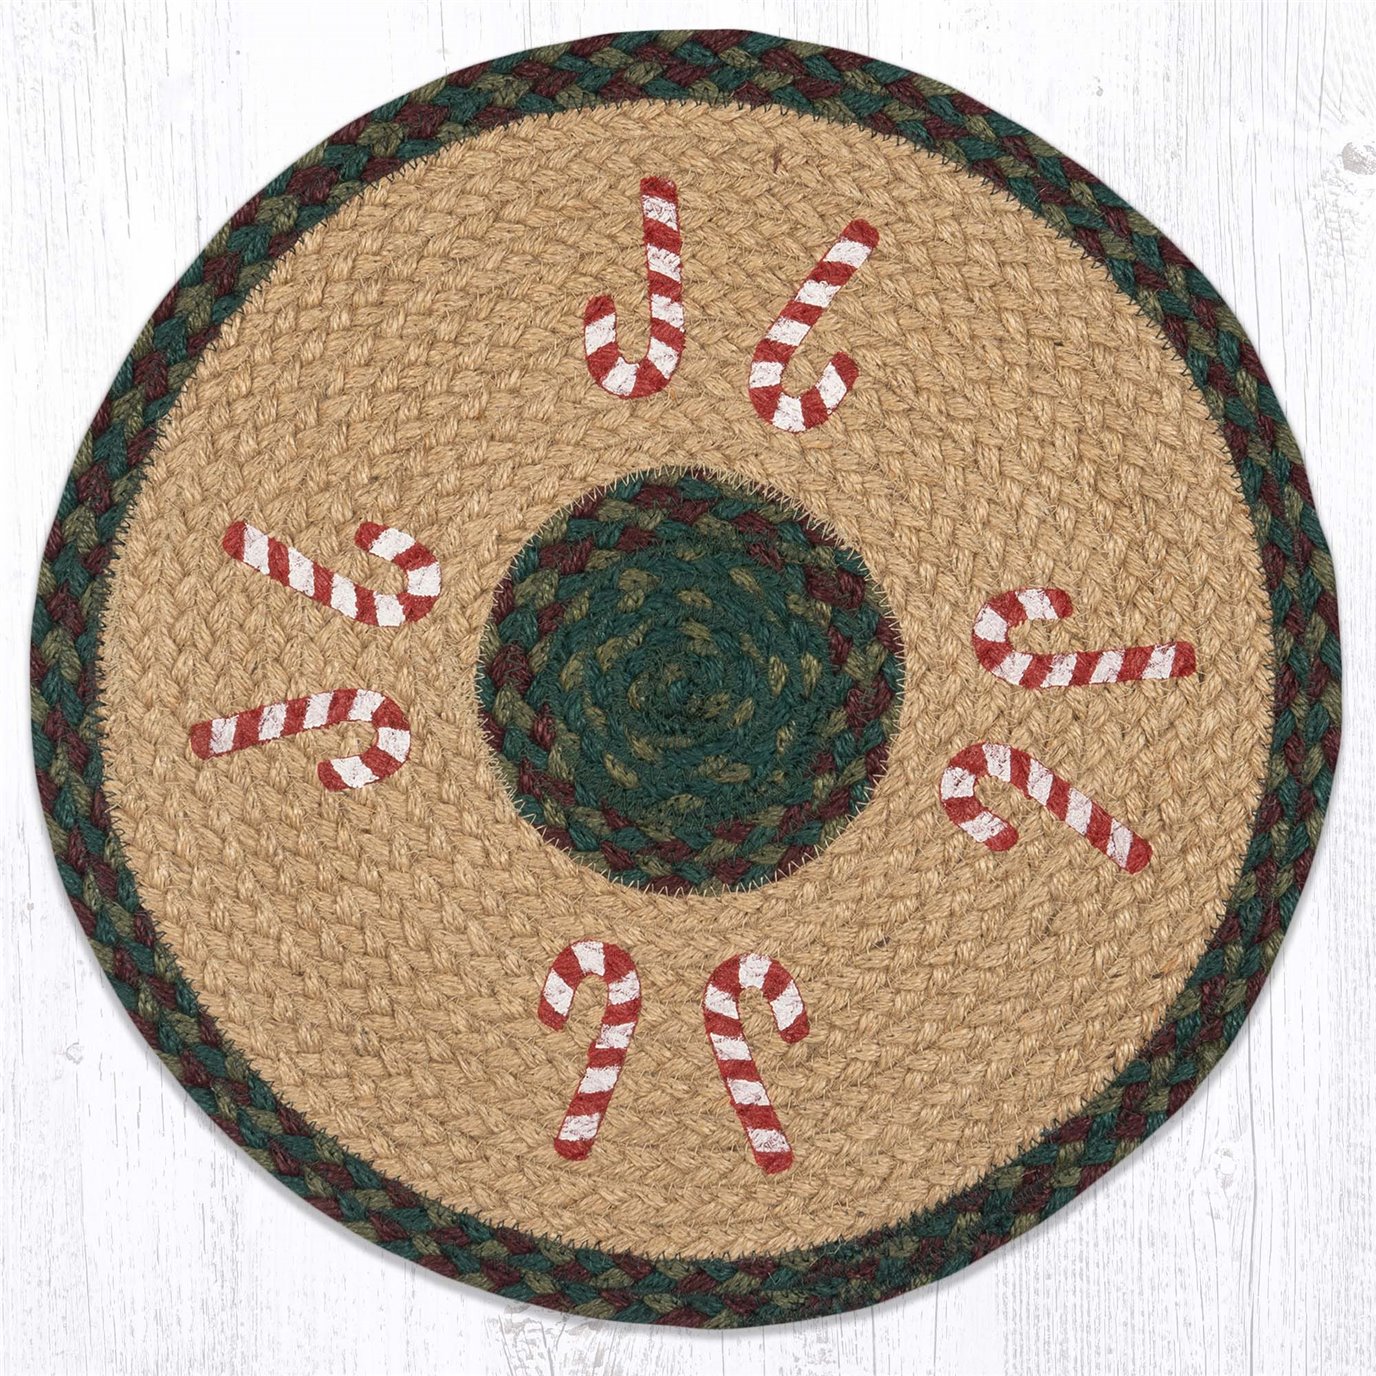 Candy Cane Printed Round Placemat 15"x15"